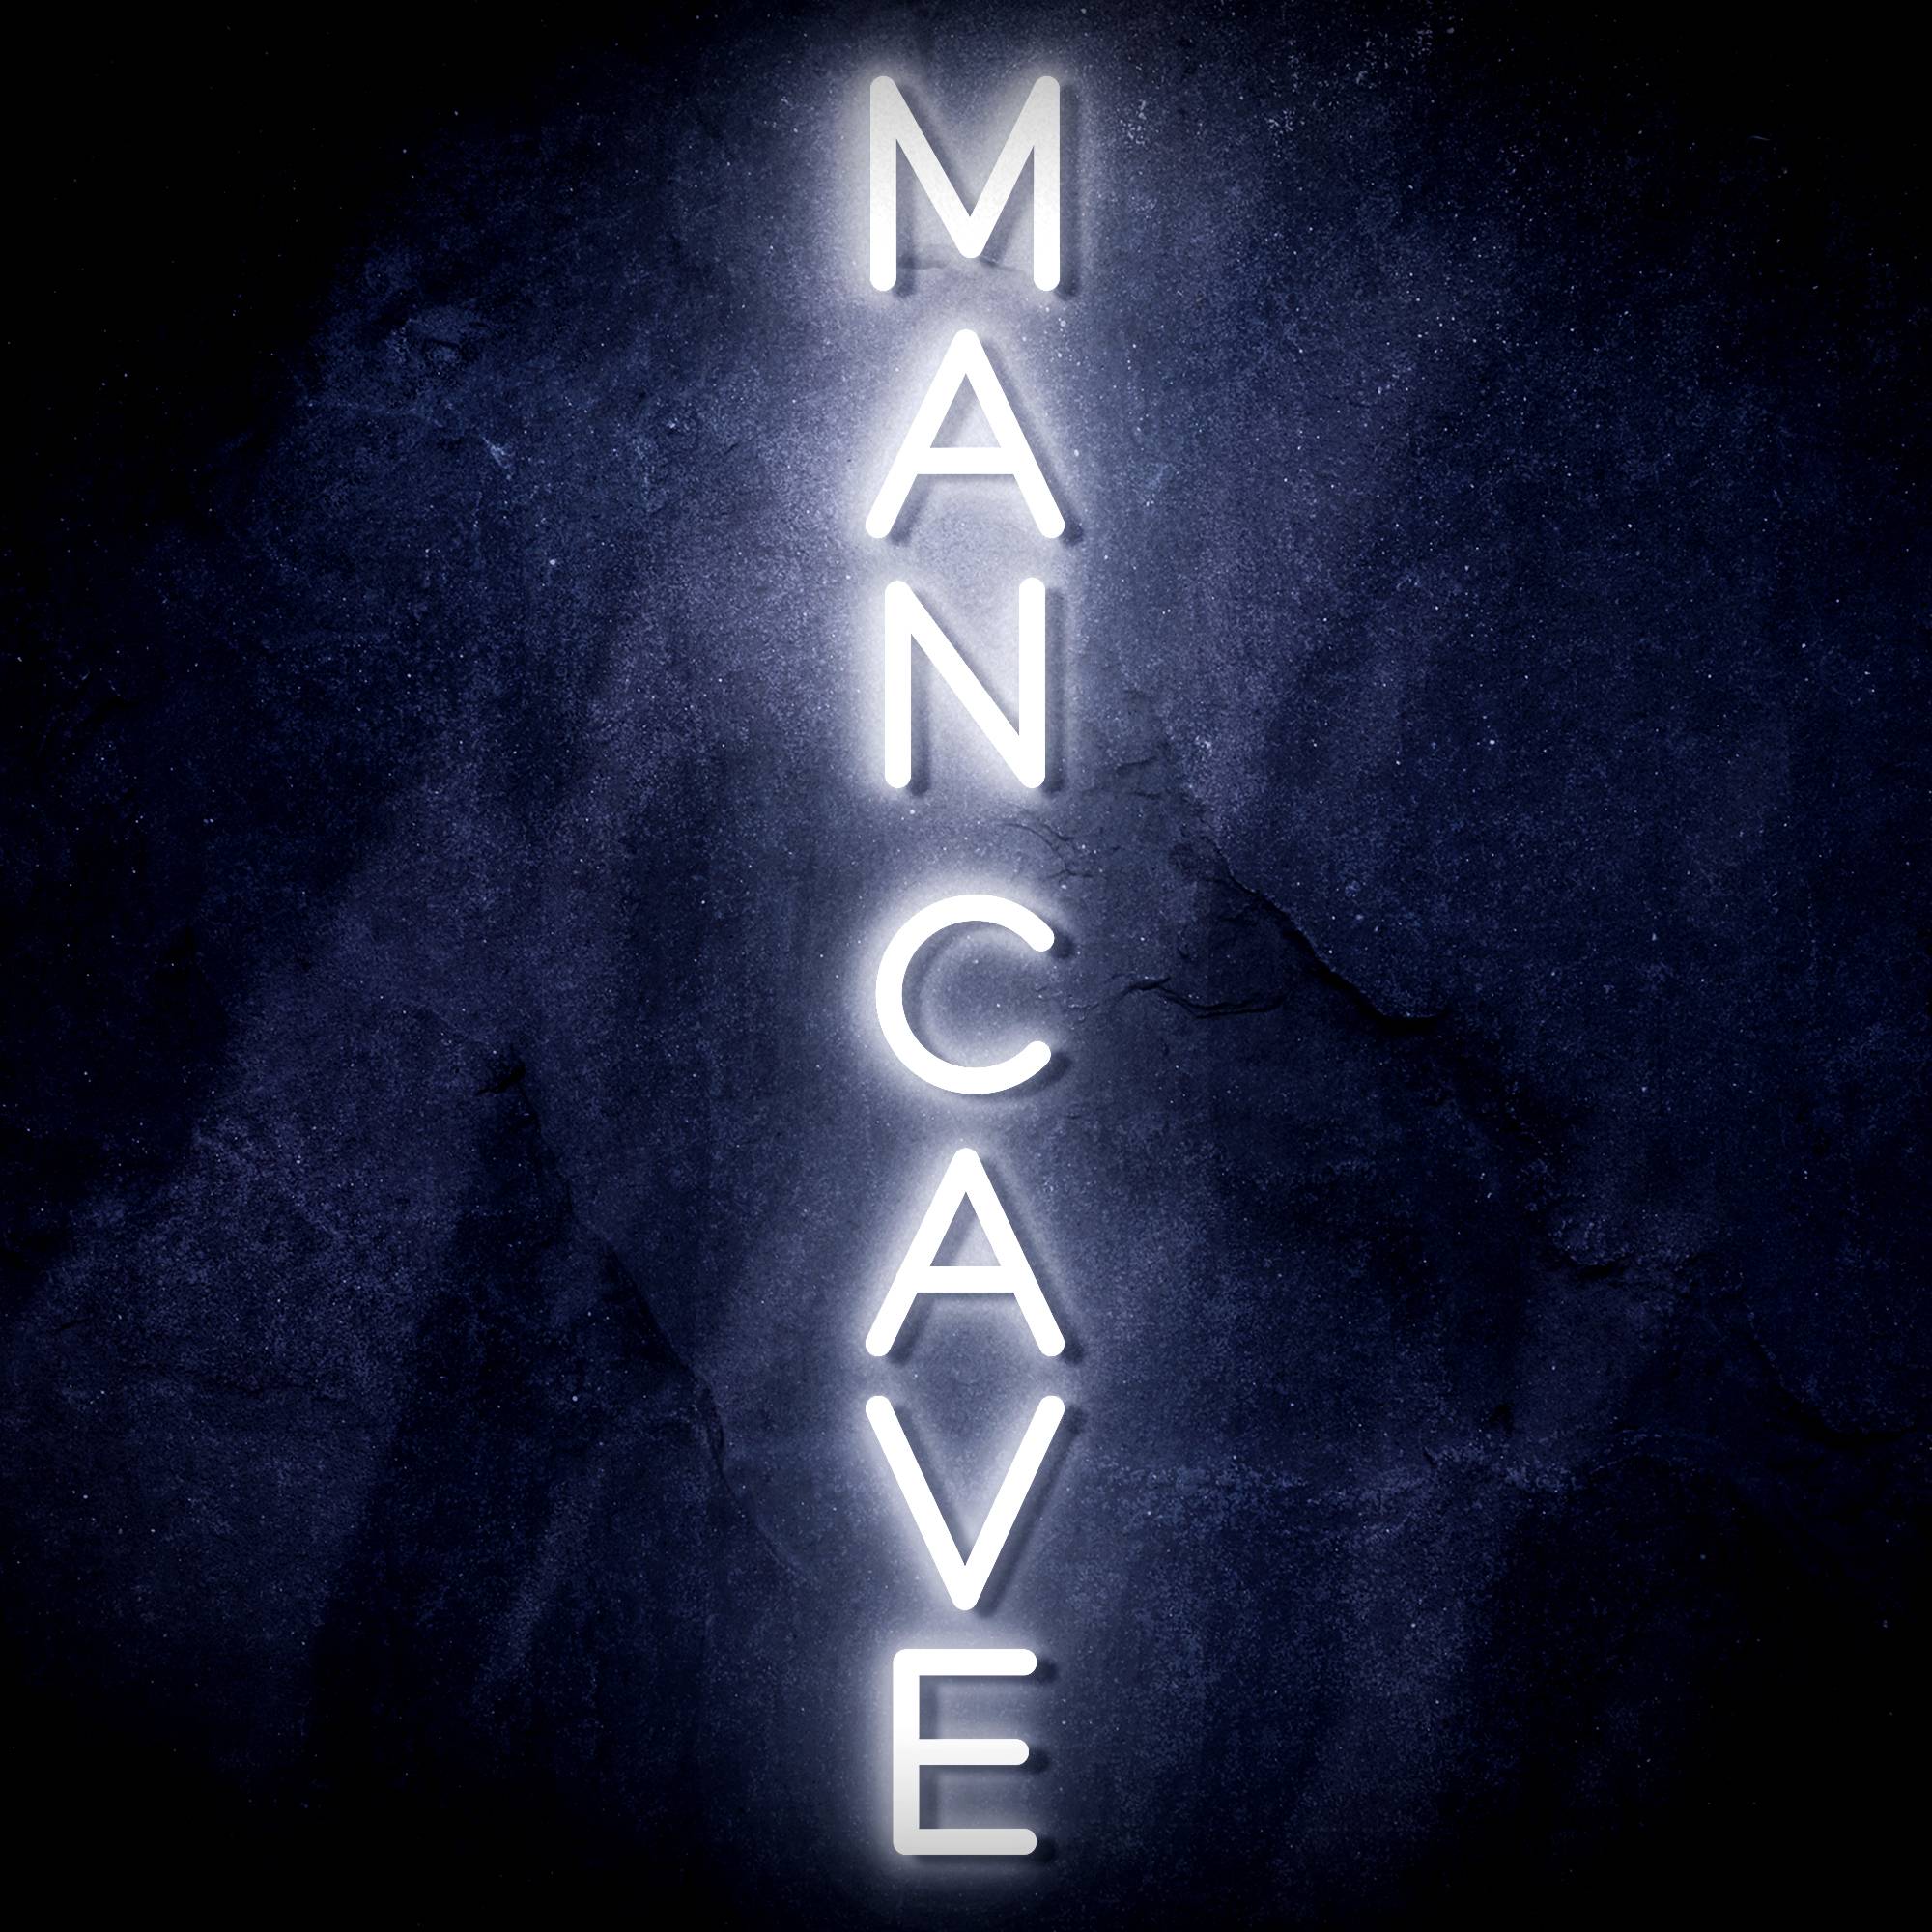 "MAN CAVE" Vertical Text Quote LED Neon Sign